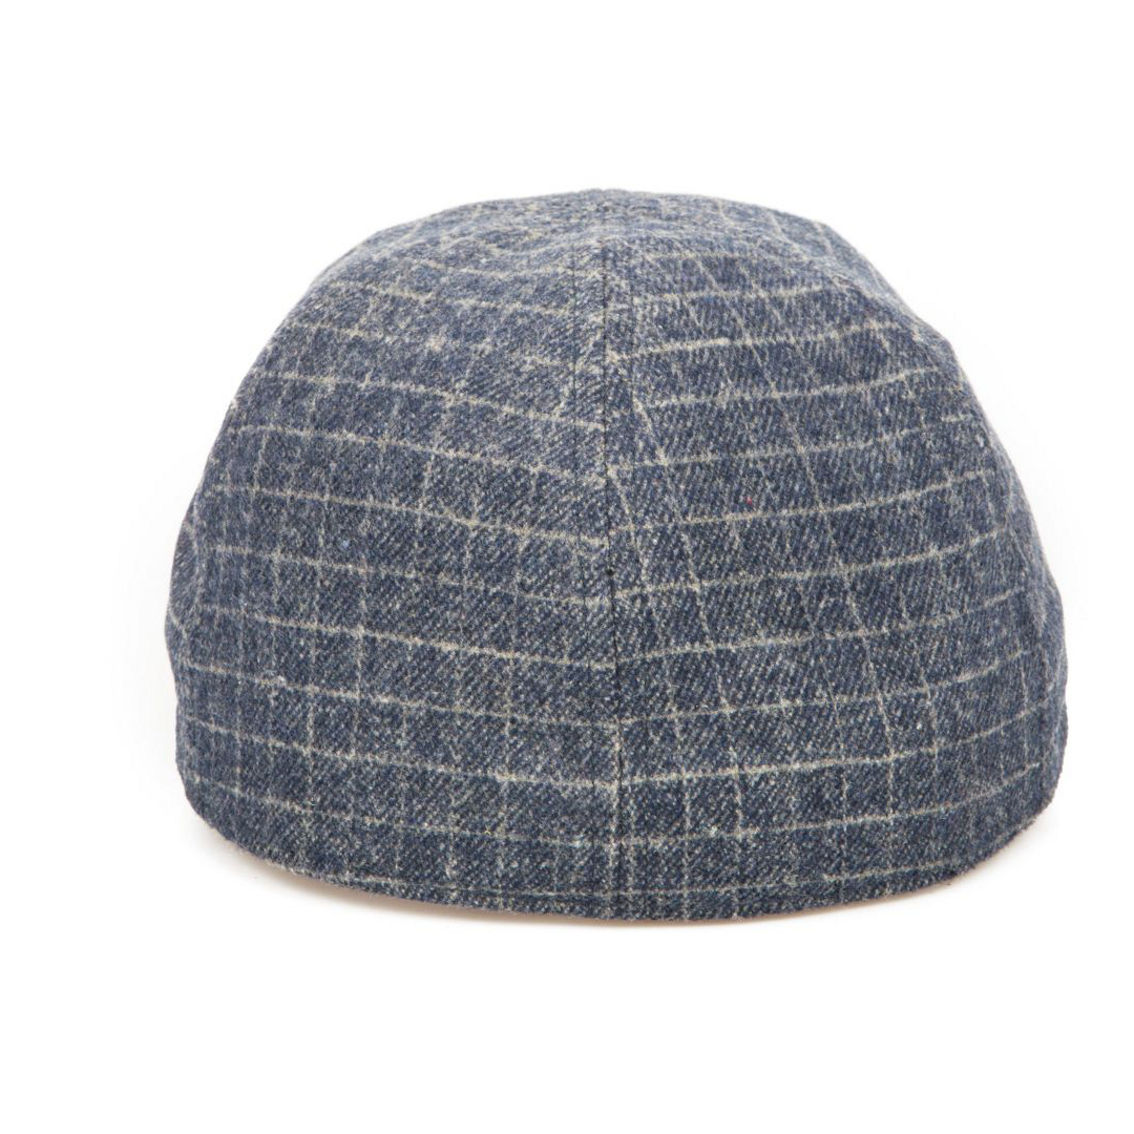 SAN DIEGO HAT COMPANY MENS DRIVER - Image 2 of 2